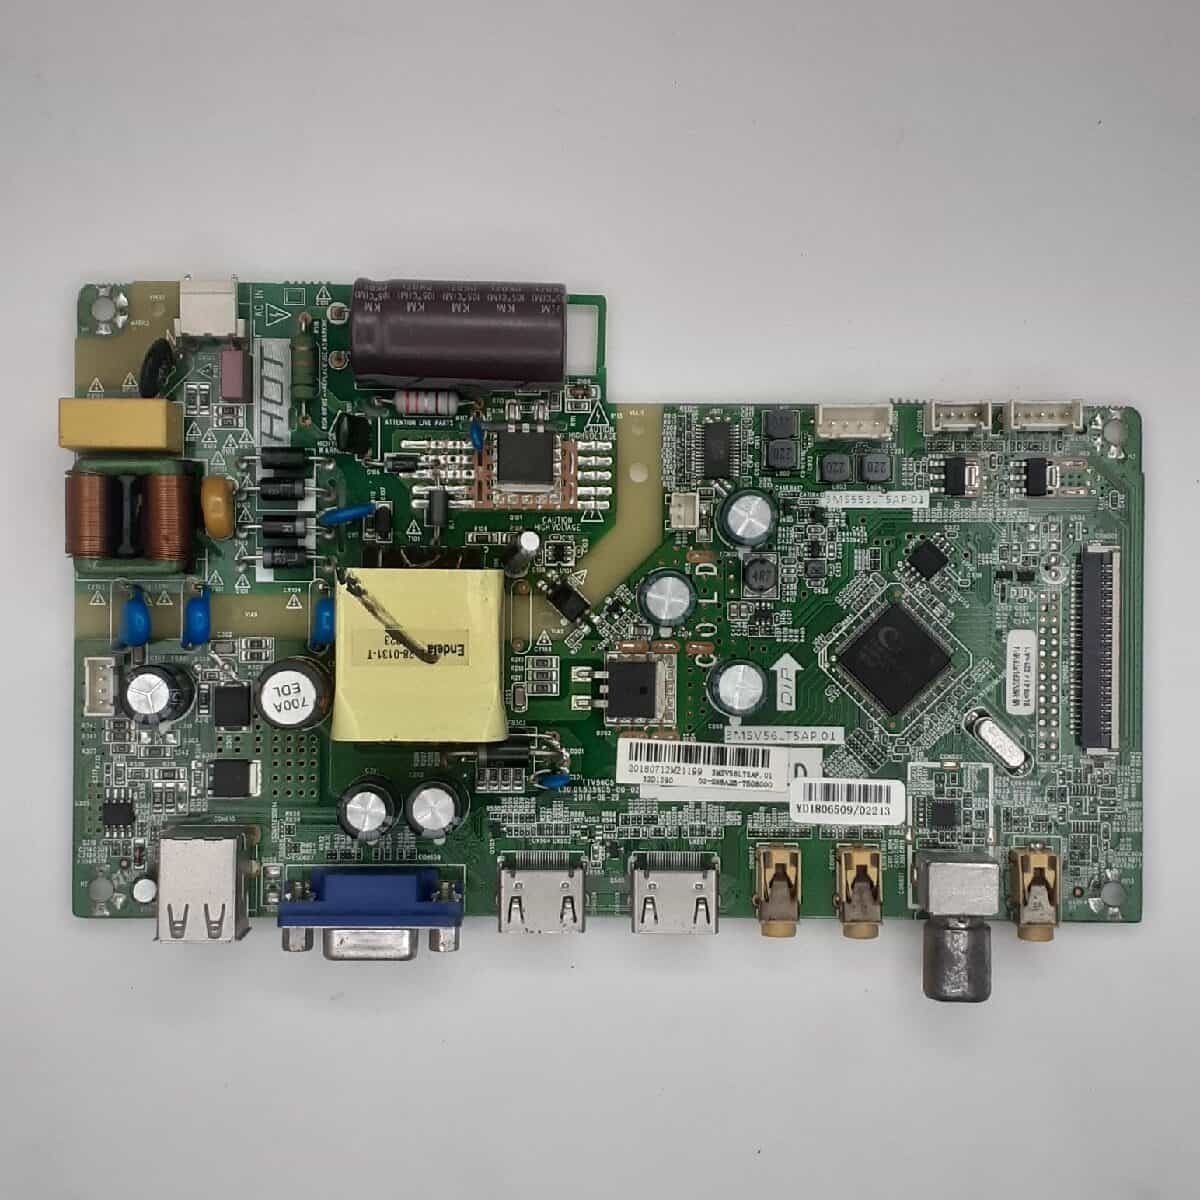 3MS553LT5AP.01 MICROMAX MOTHERBOARD FOR LED TV